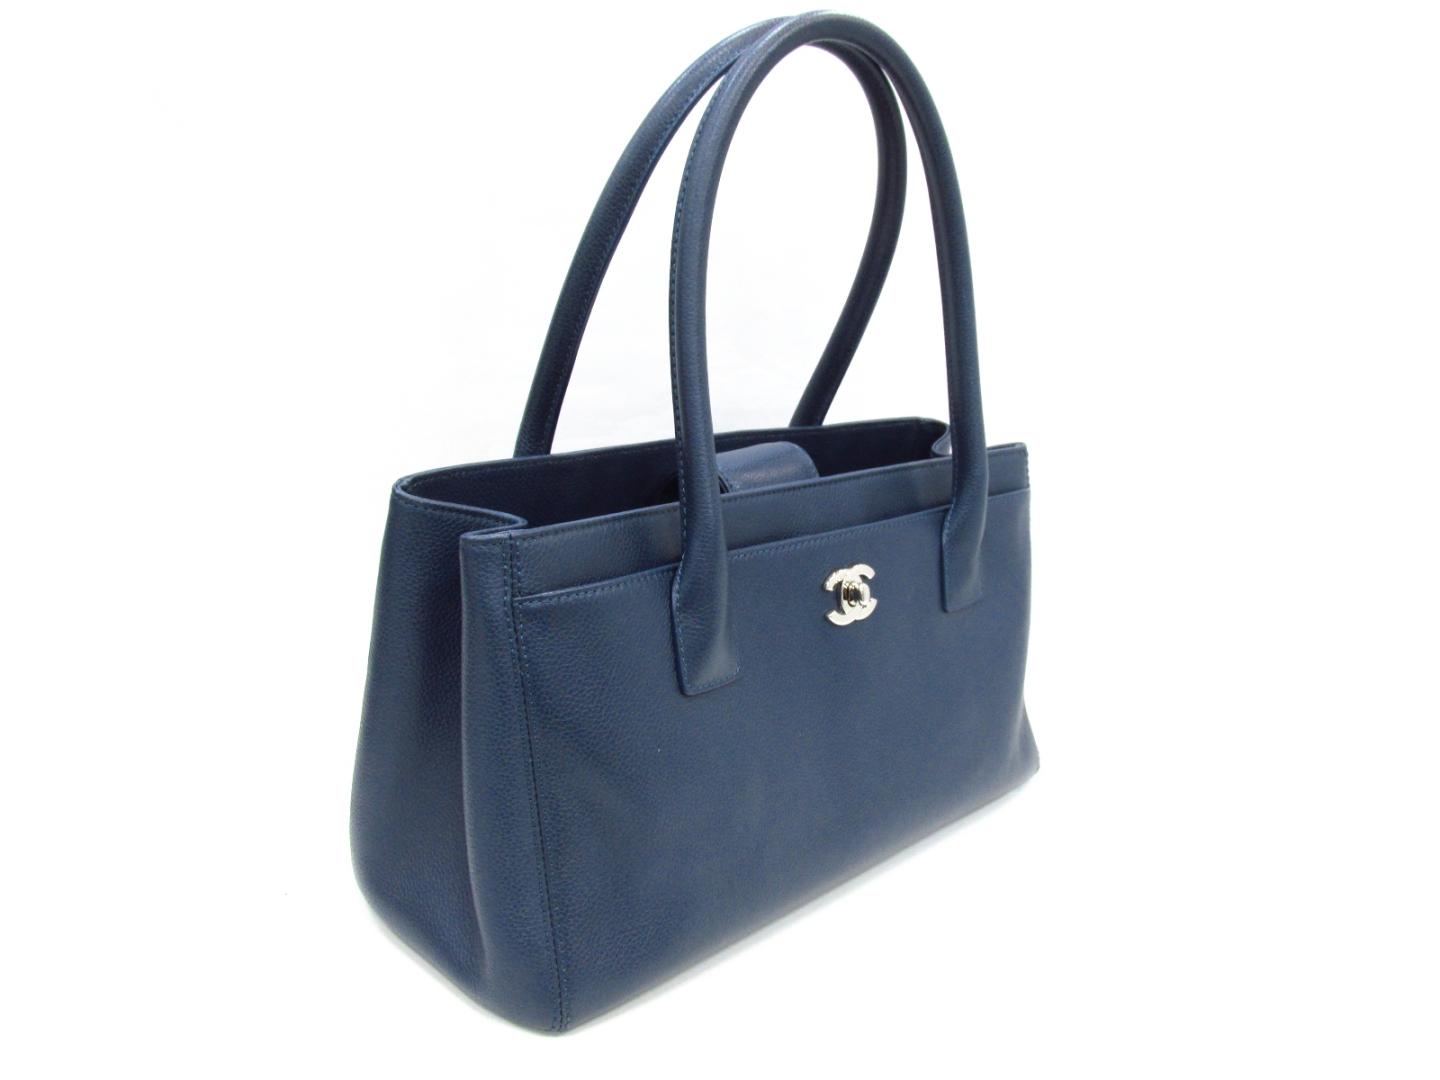 Chanel - Blue Leather Large Executive Tote Bag – Every Watch Has a